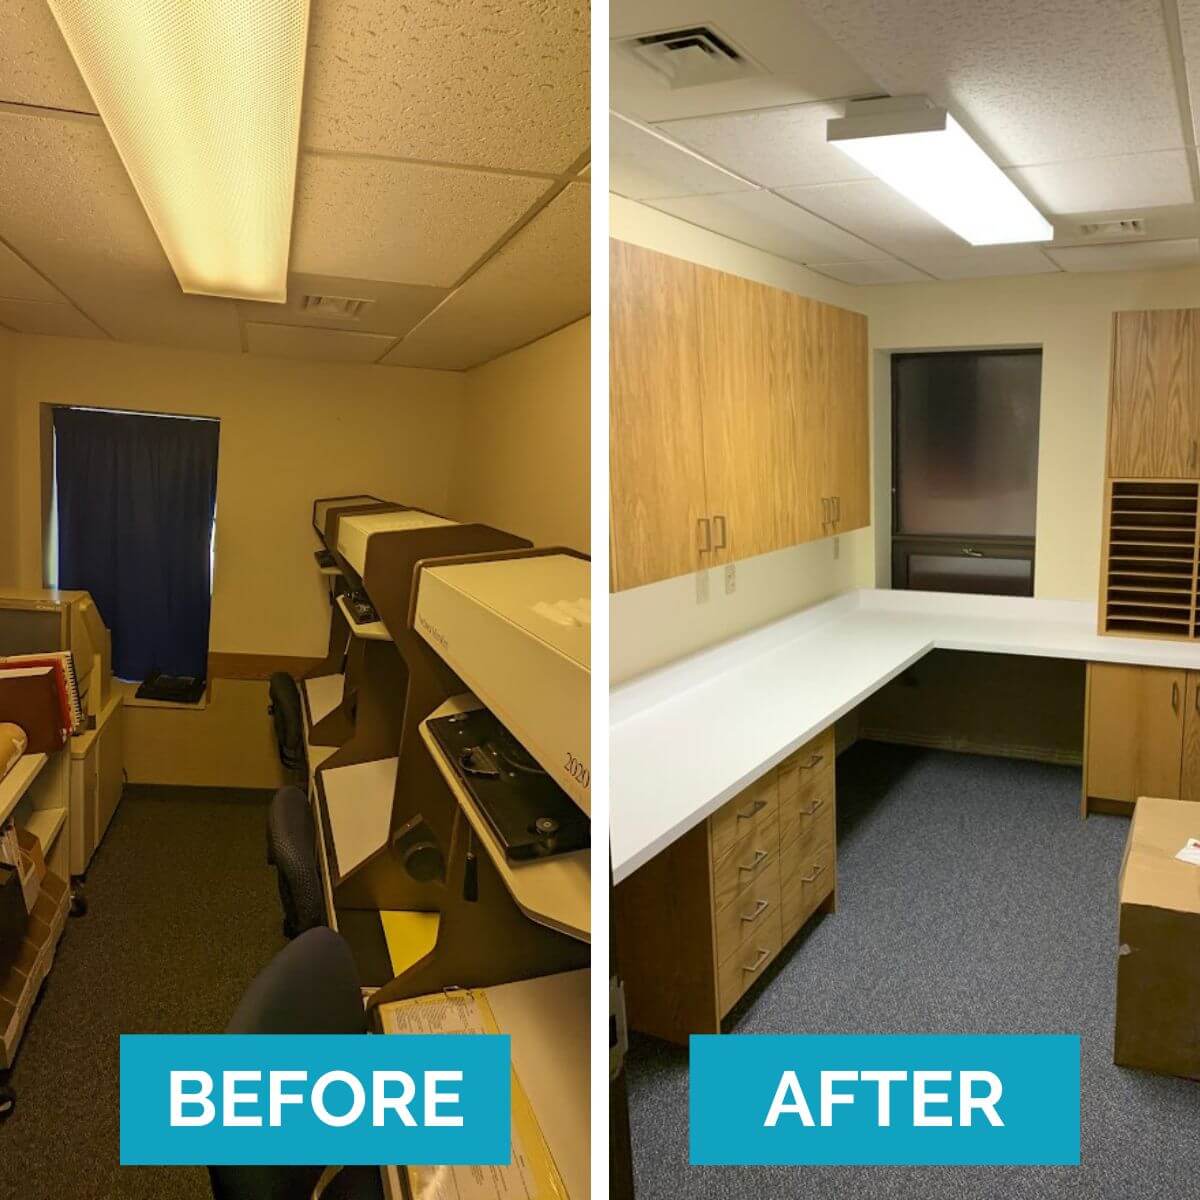 Etobicoke church office remodeling before after